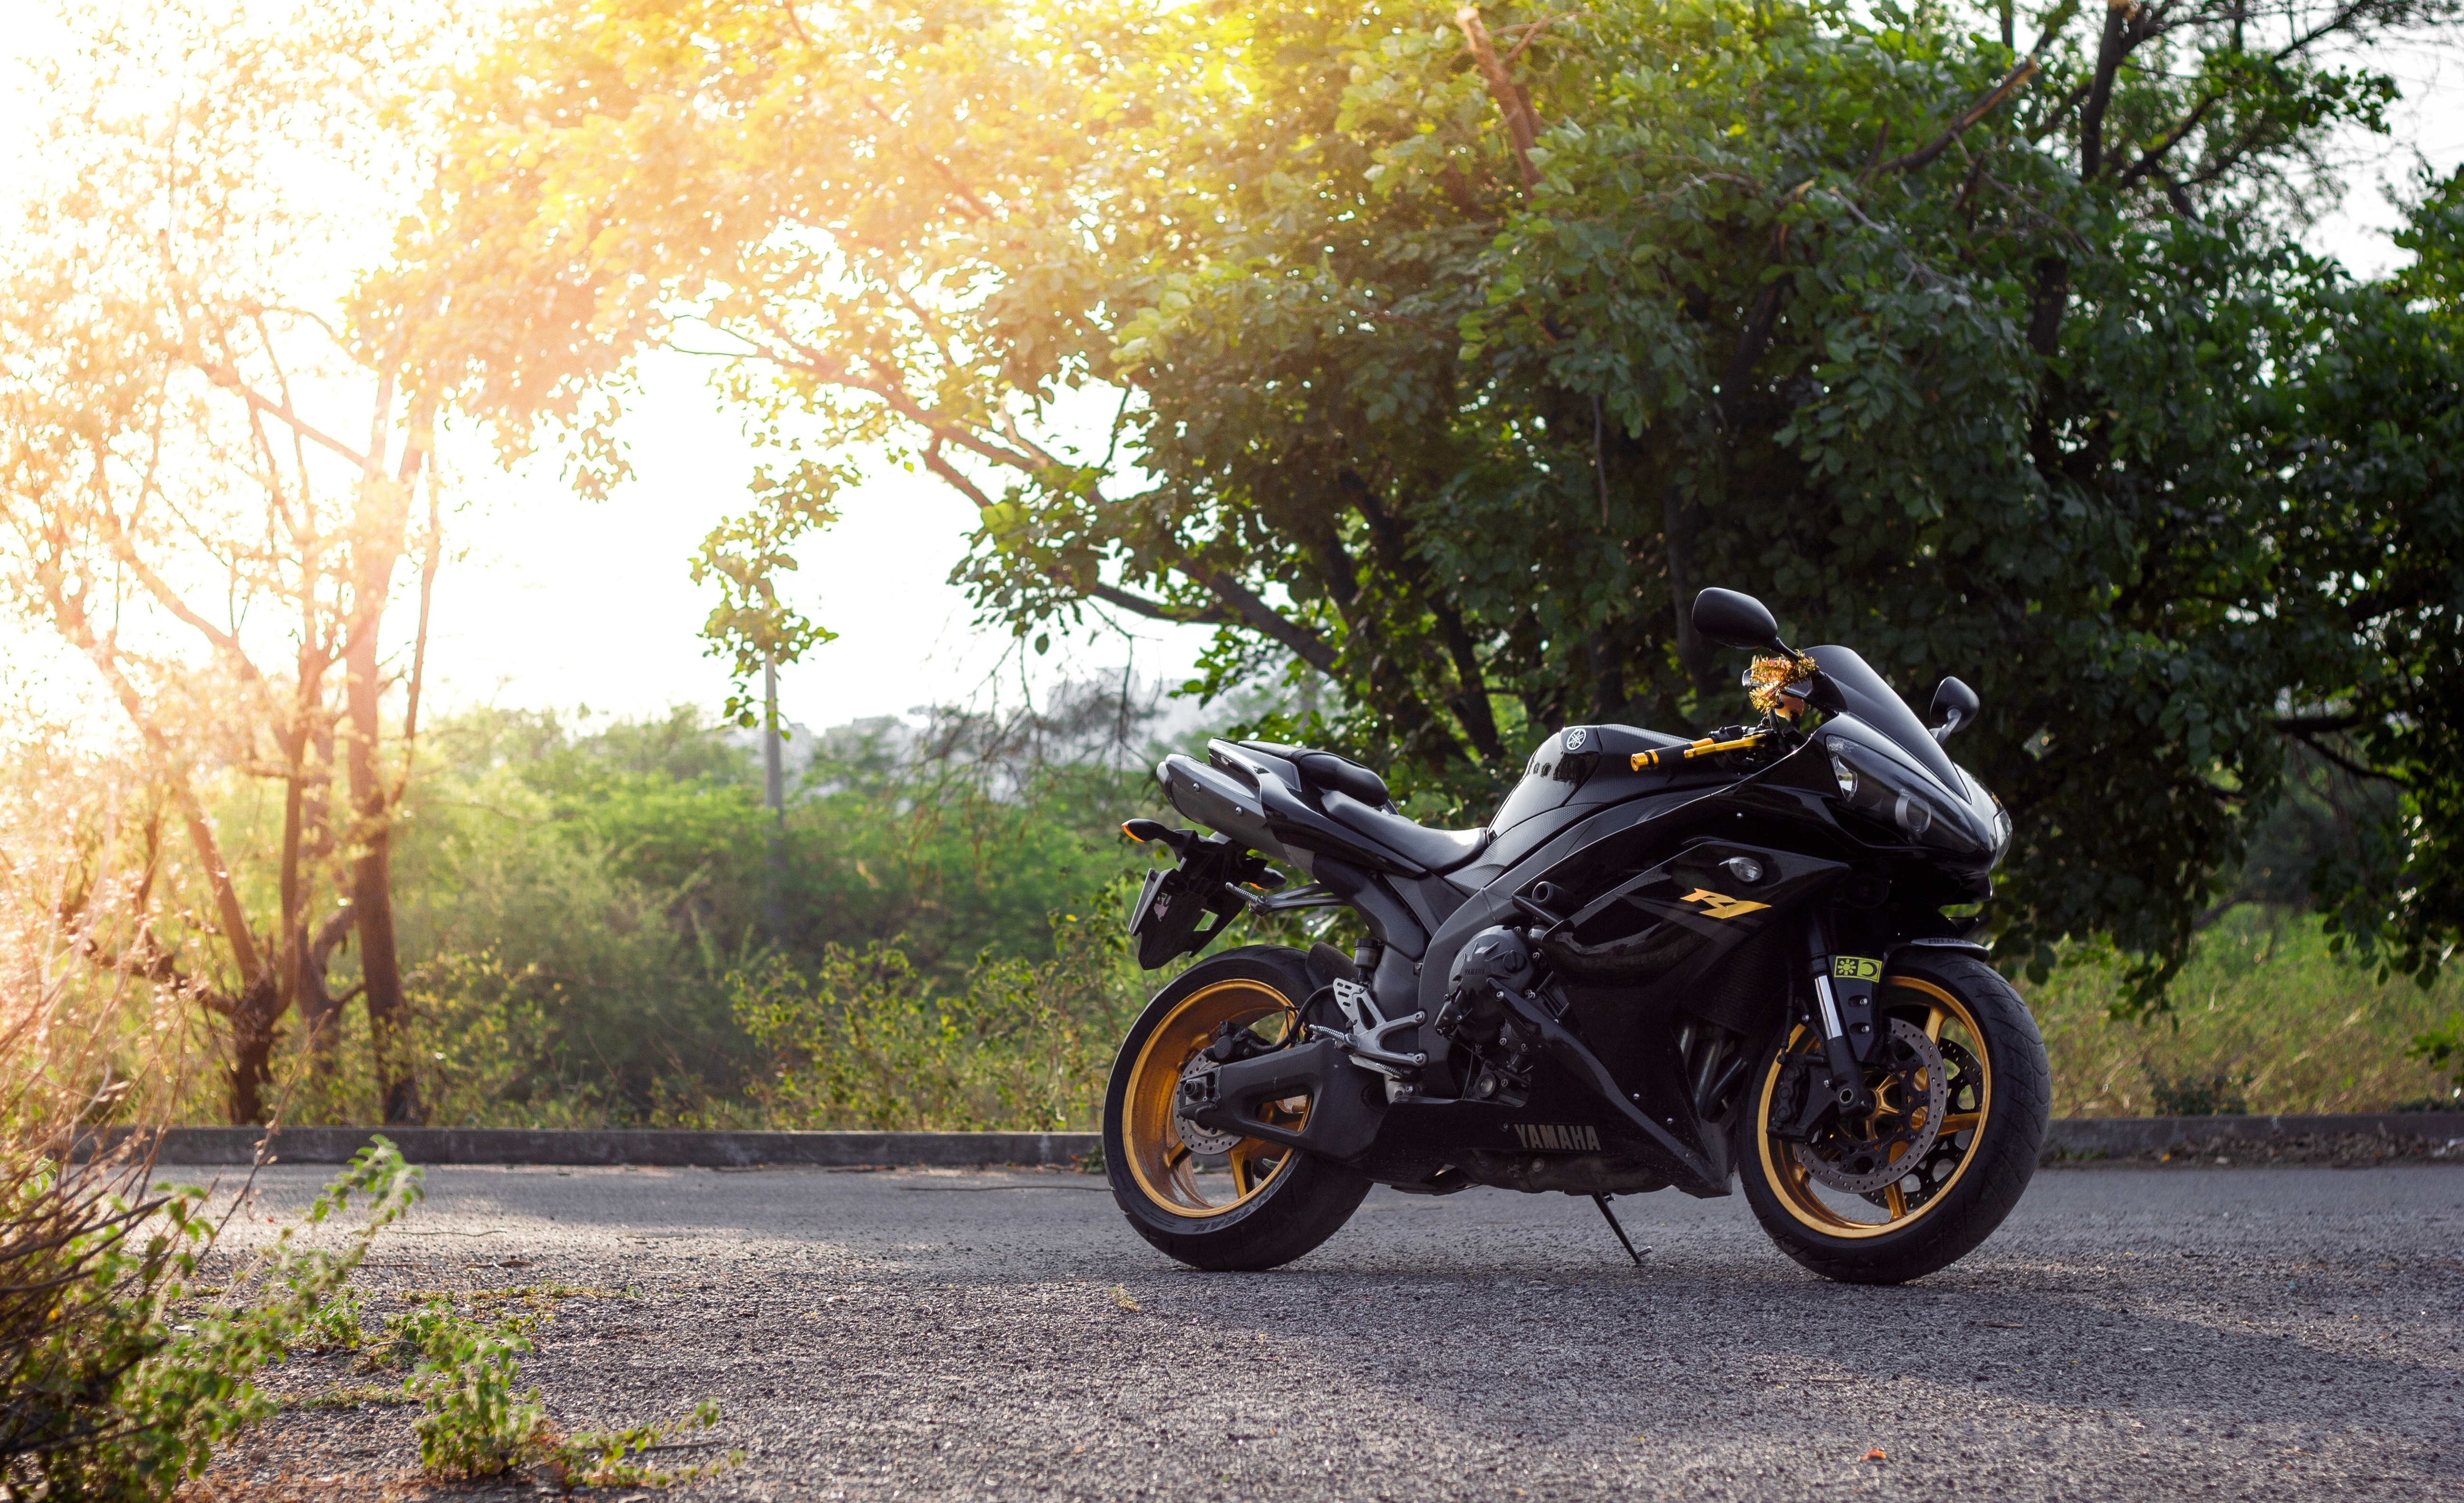 Wallpaper | Motorcycles | photo | picture | yamaha, YZF-R1, black, bike,  supersport